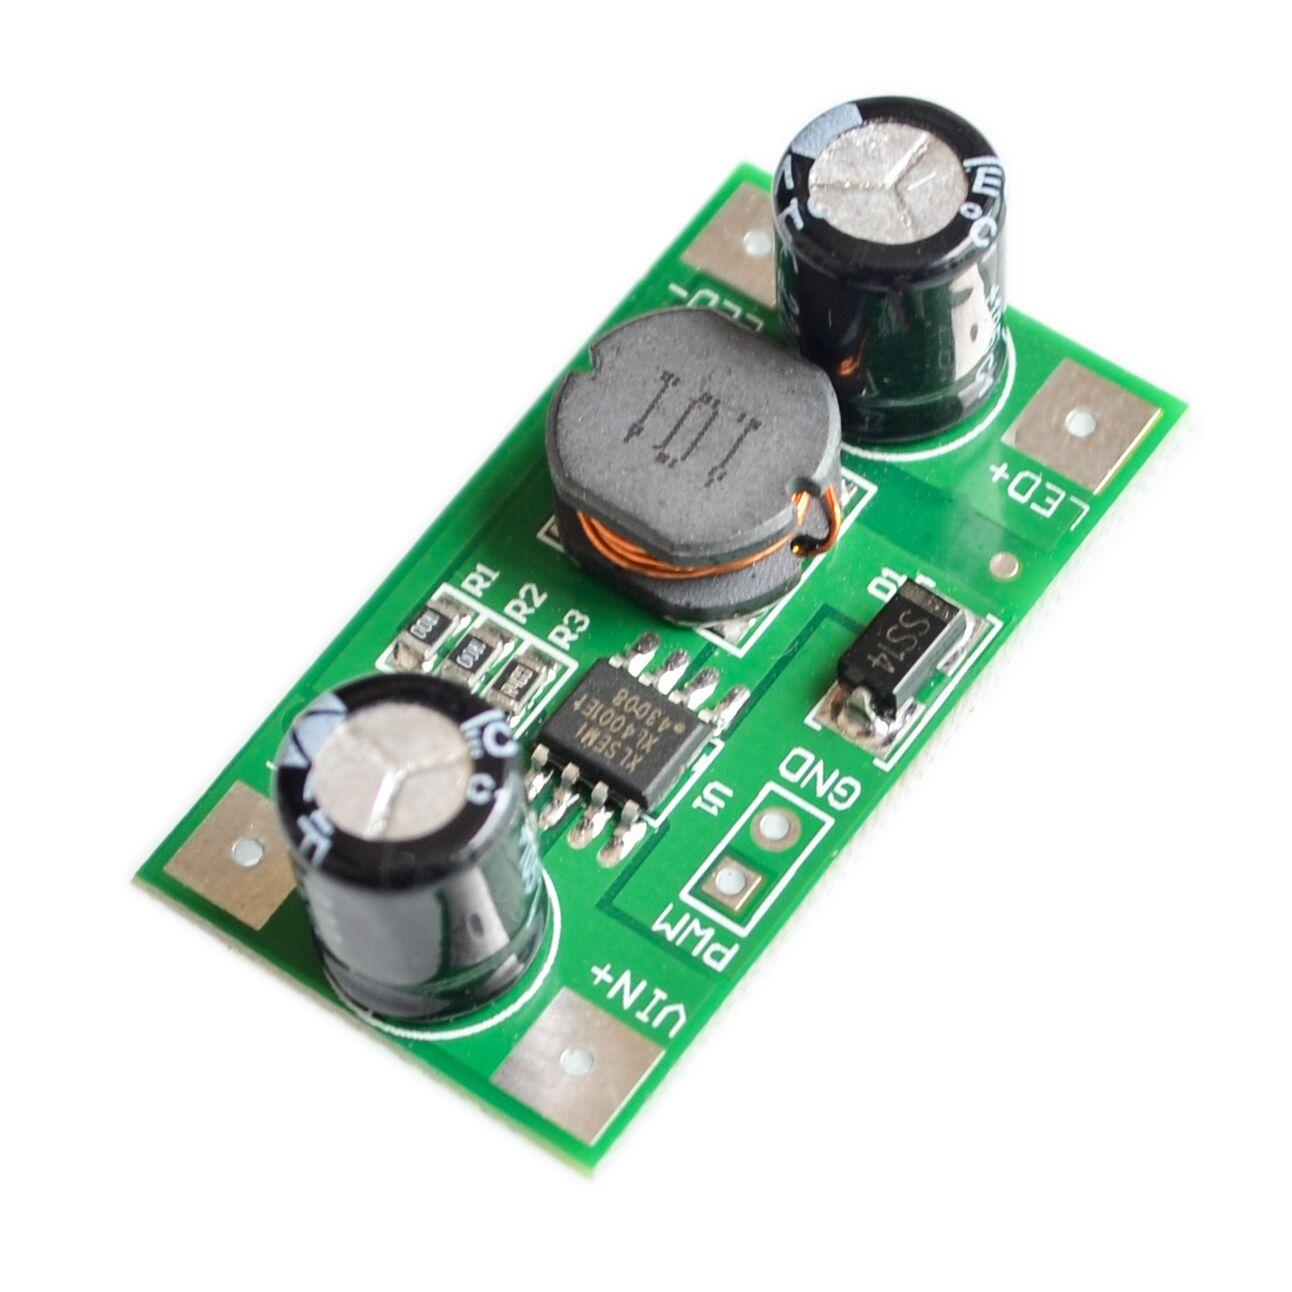 10PCS/LOT 3W 5-35V LED Driver 700mA PWM Dimming DC to DC Step-down Constant Current